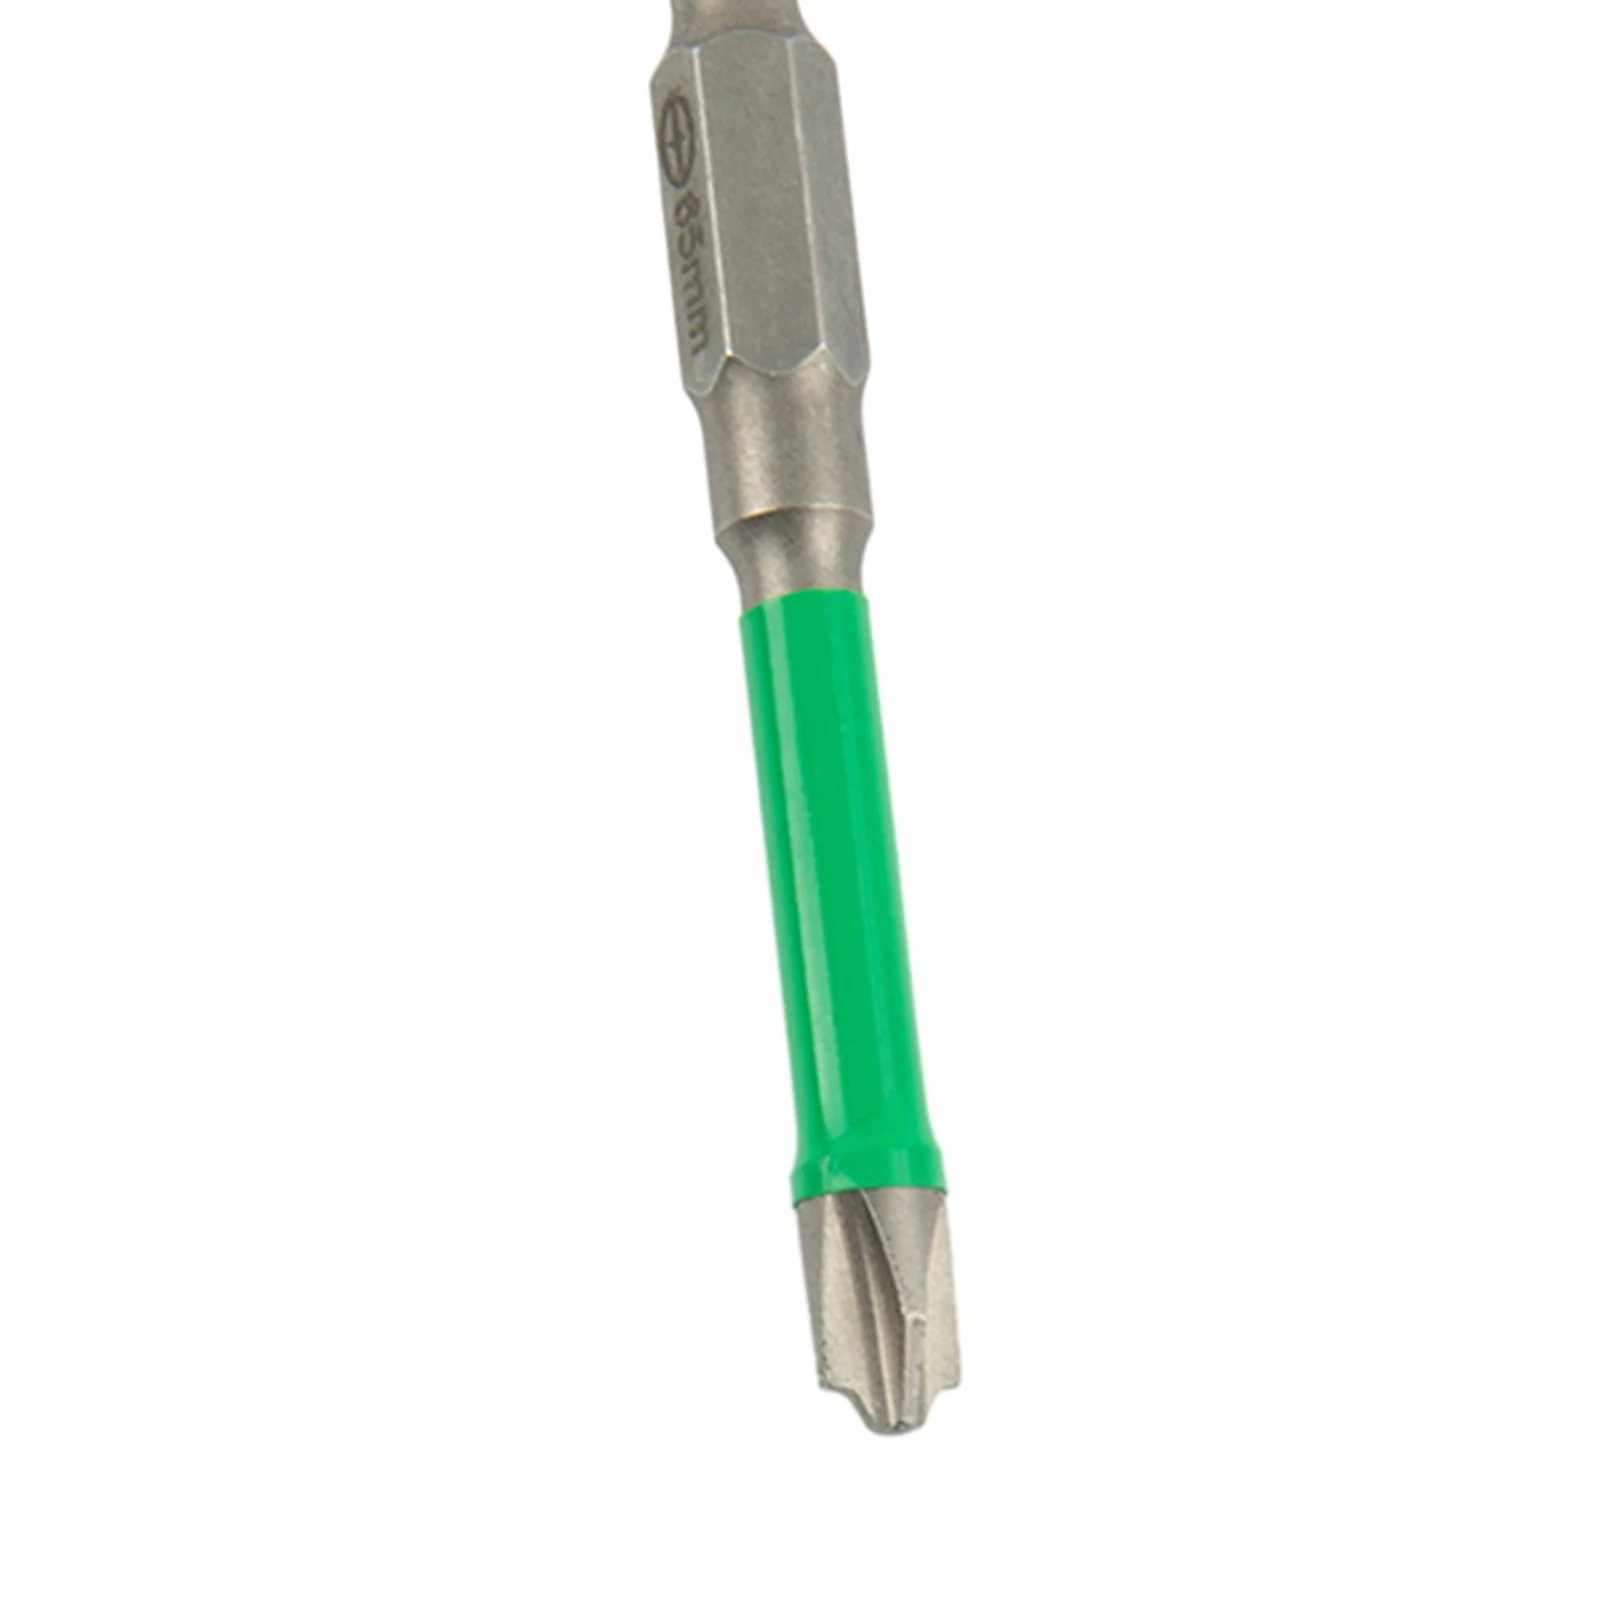 High Hardness Magnetic Special Cross Screwdriver Bit FPH2 55mm Head Option for 65mm/110mm or 65mm+110mm Length